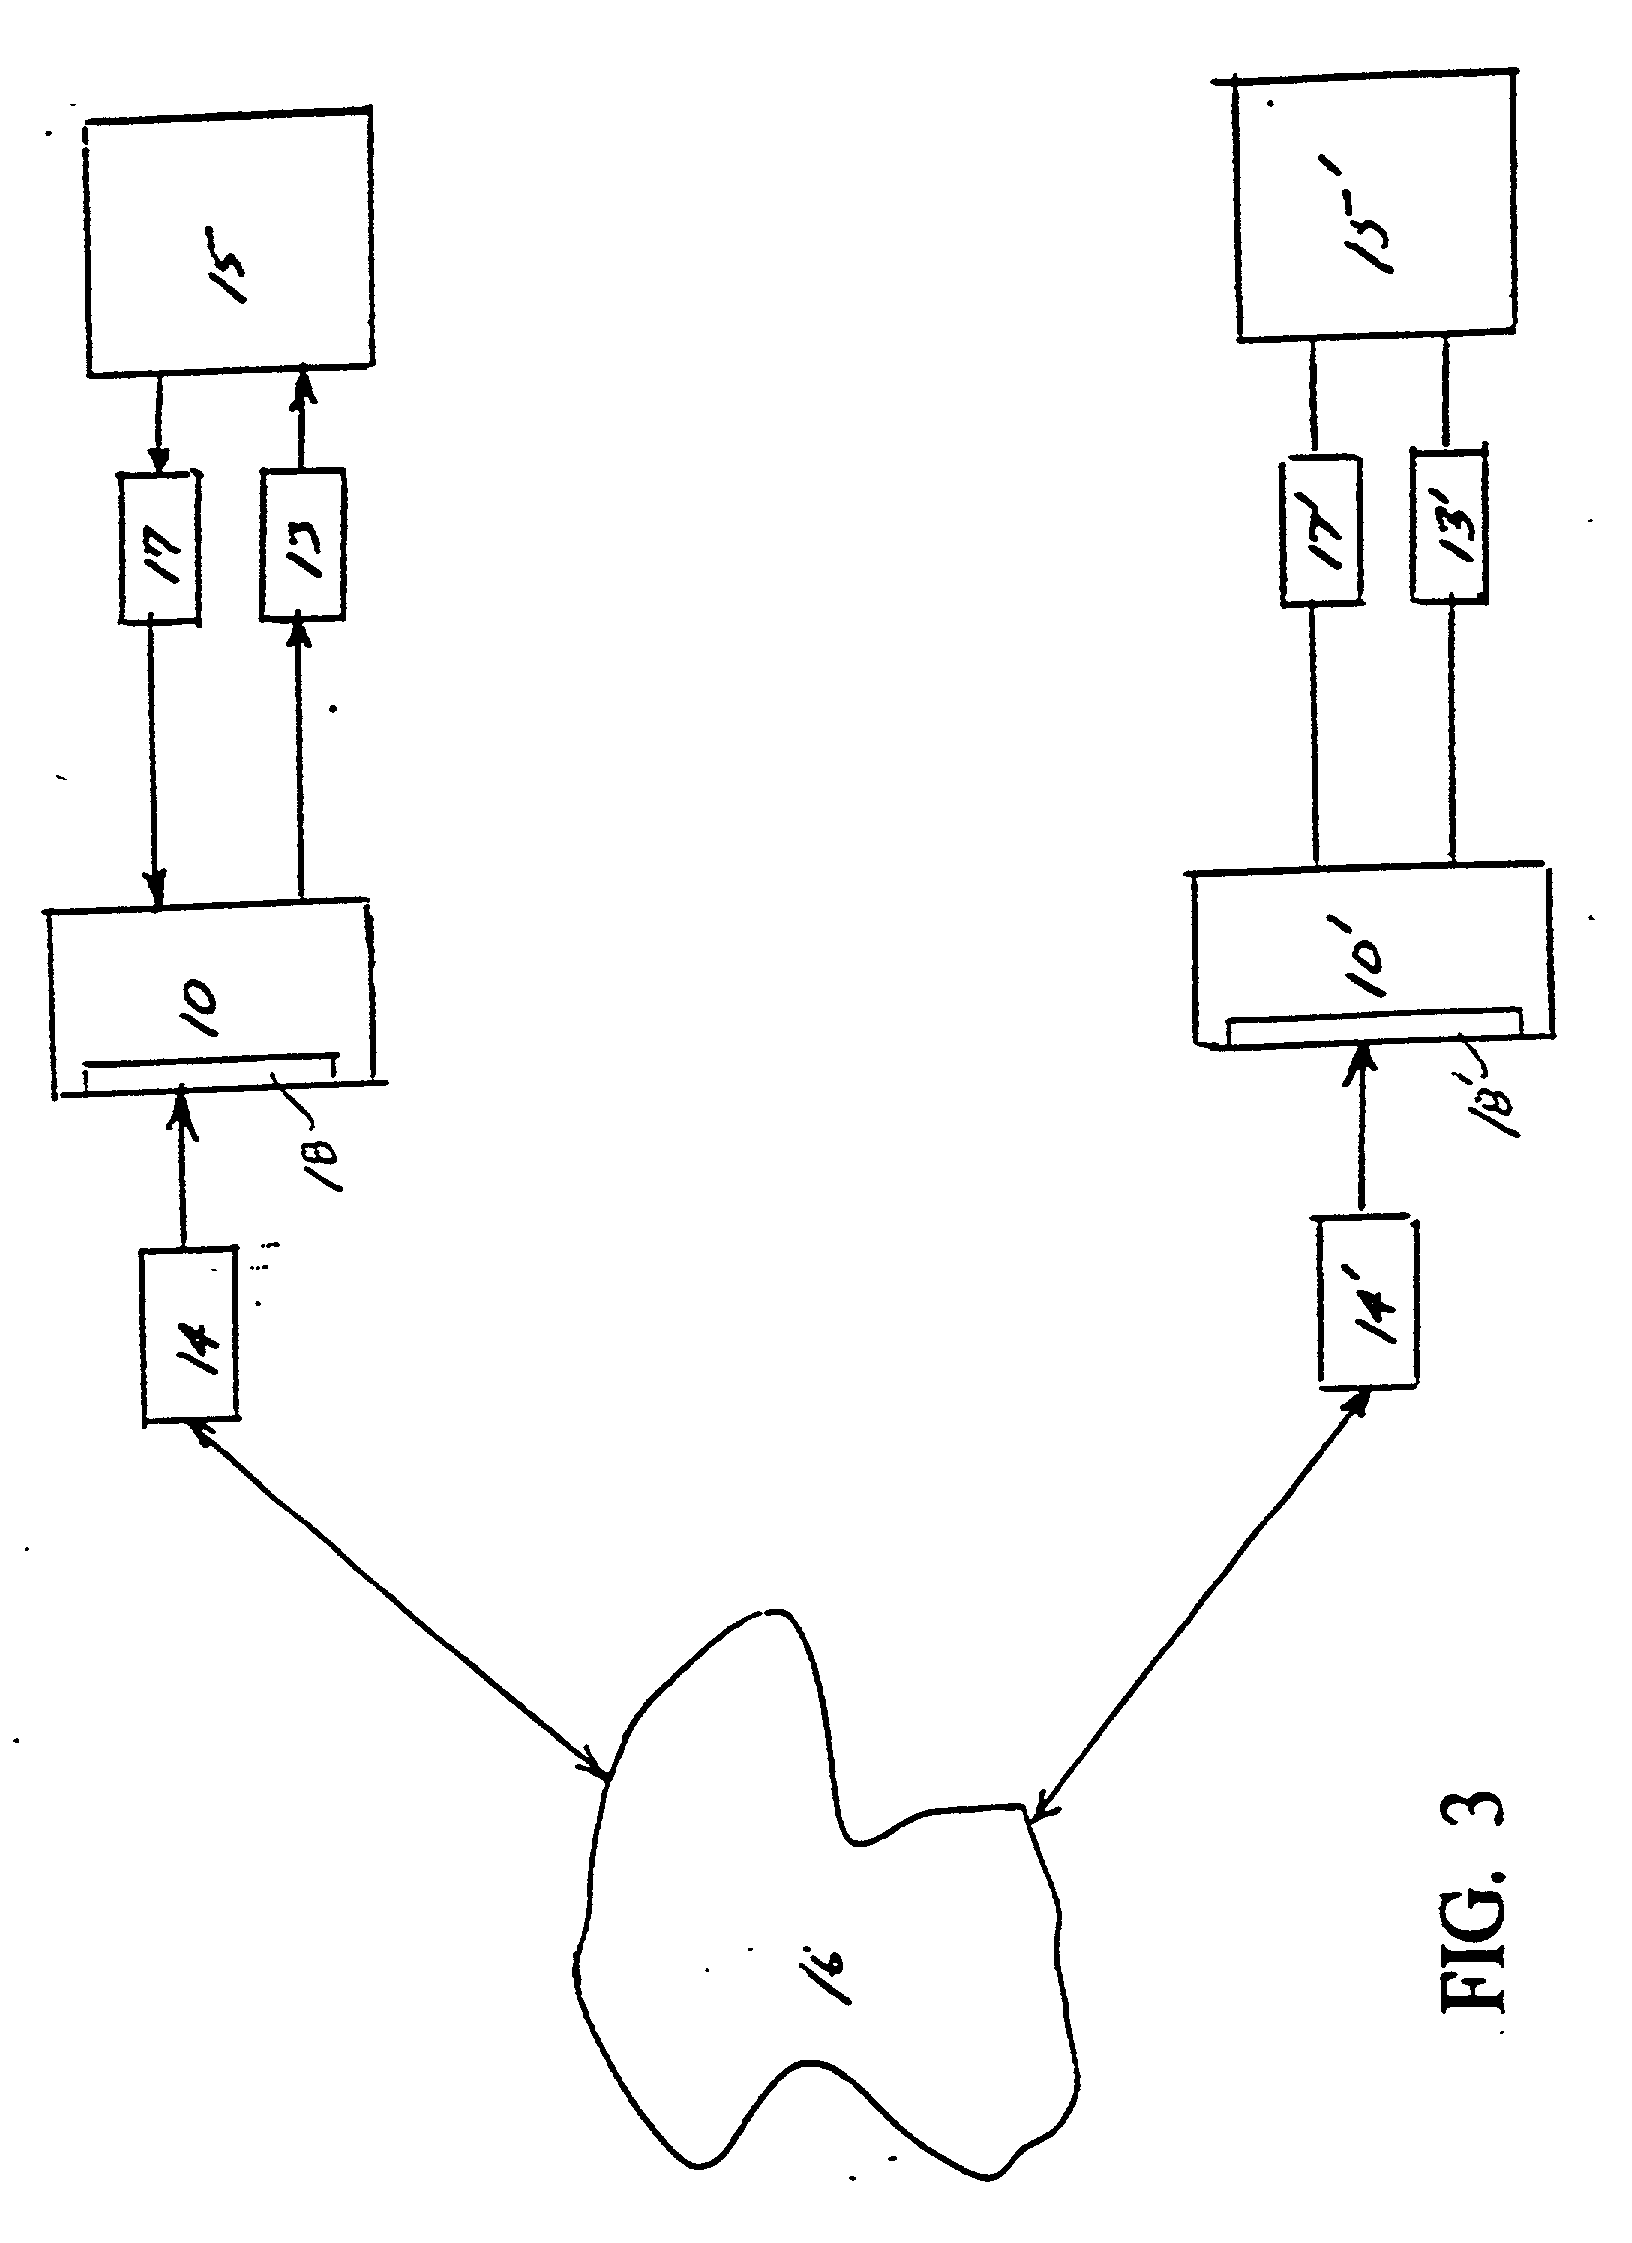 Processes systems and networks for secured information exchange using computer hardware